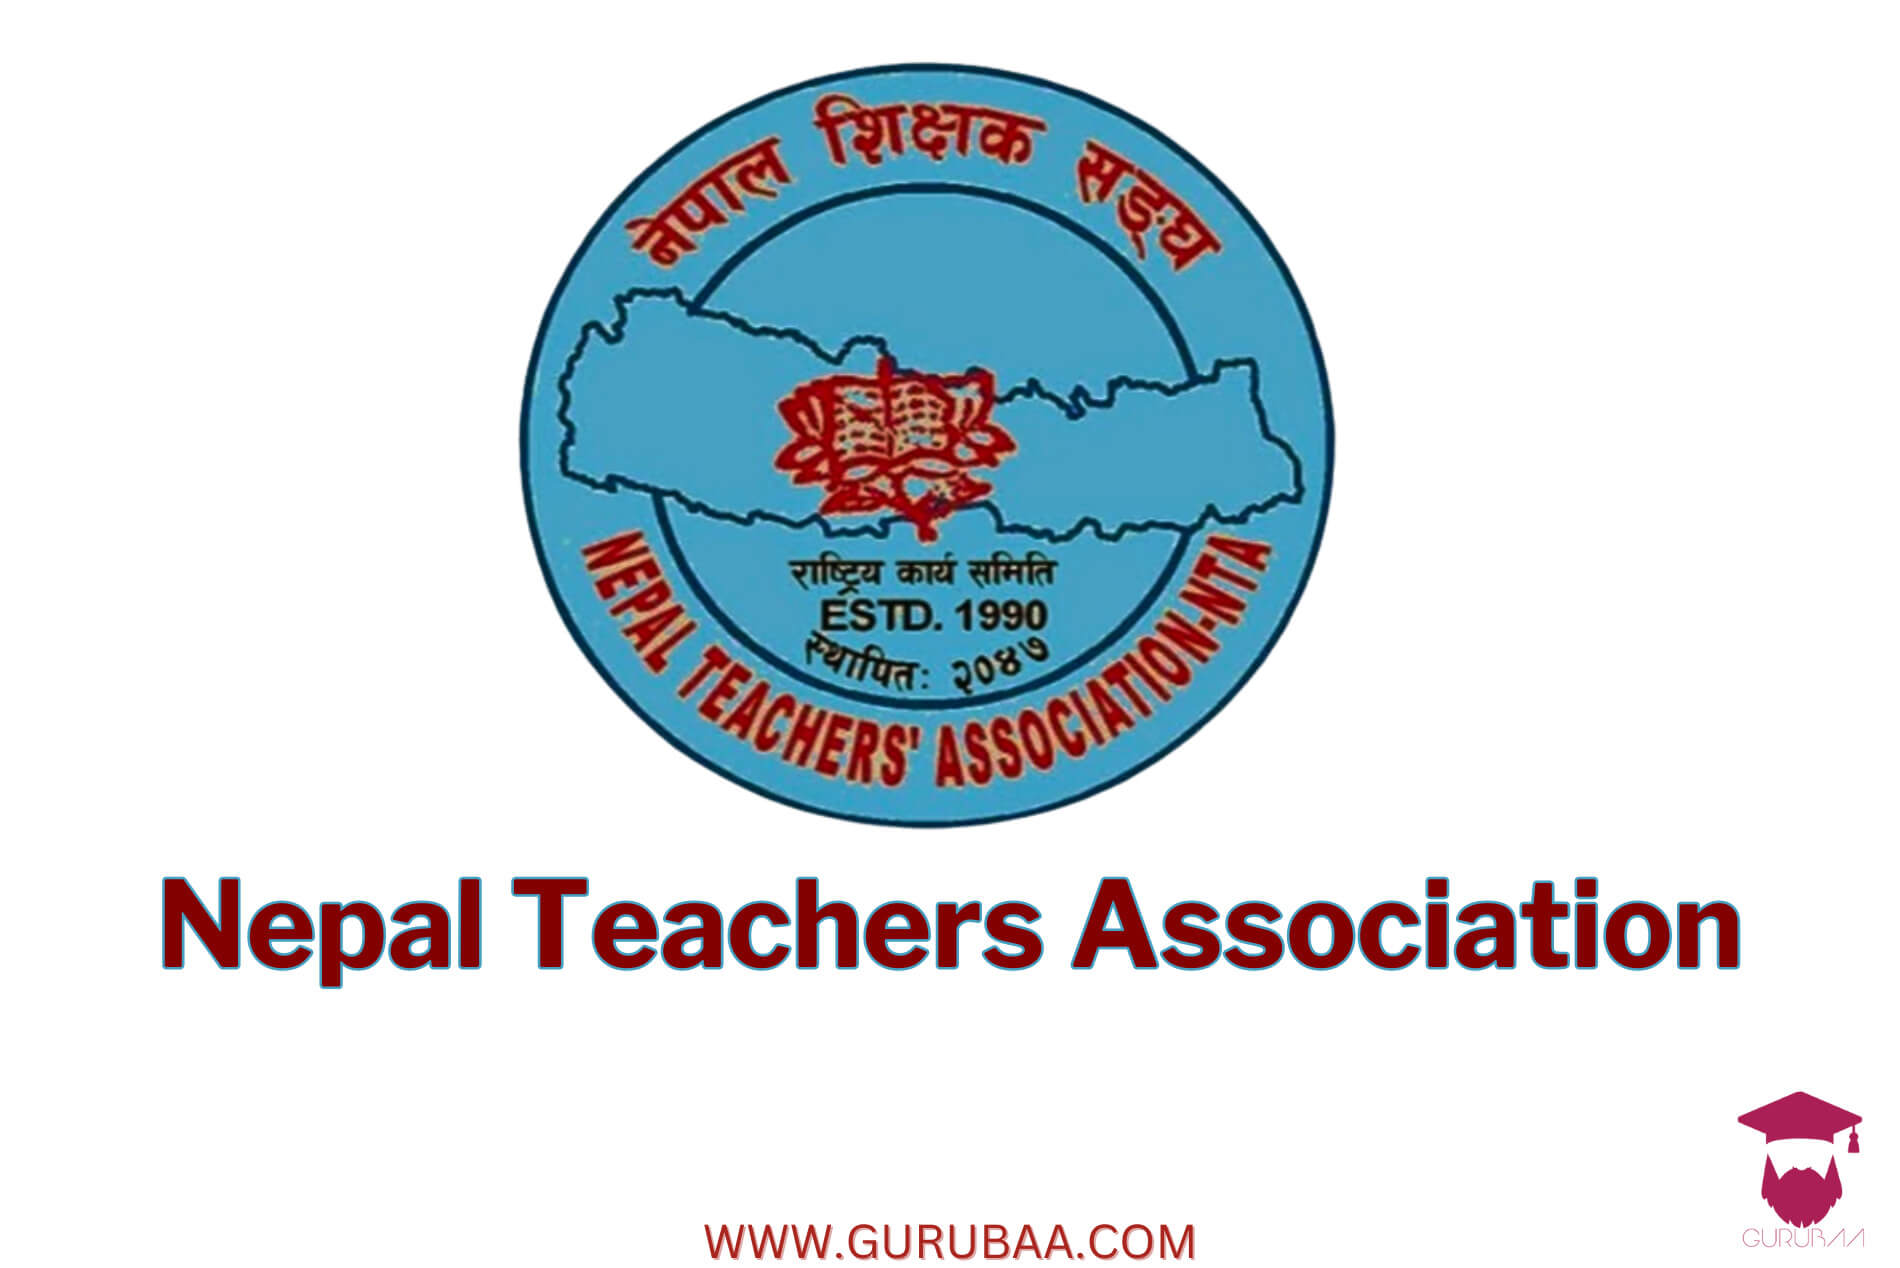 Subedi elected as chairperson of Nepal Teachers' Federation